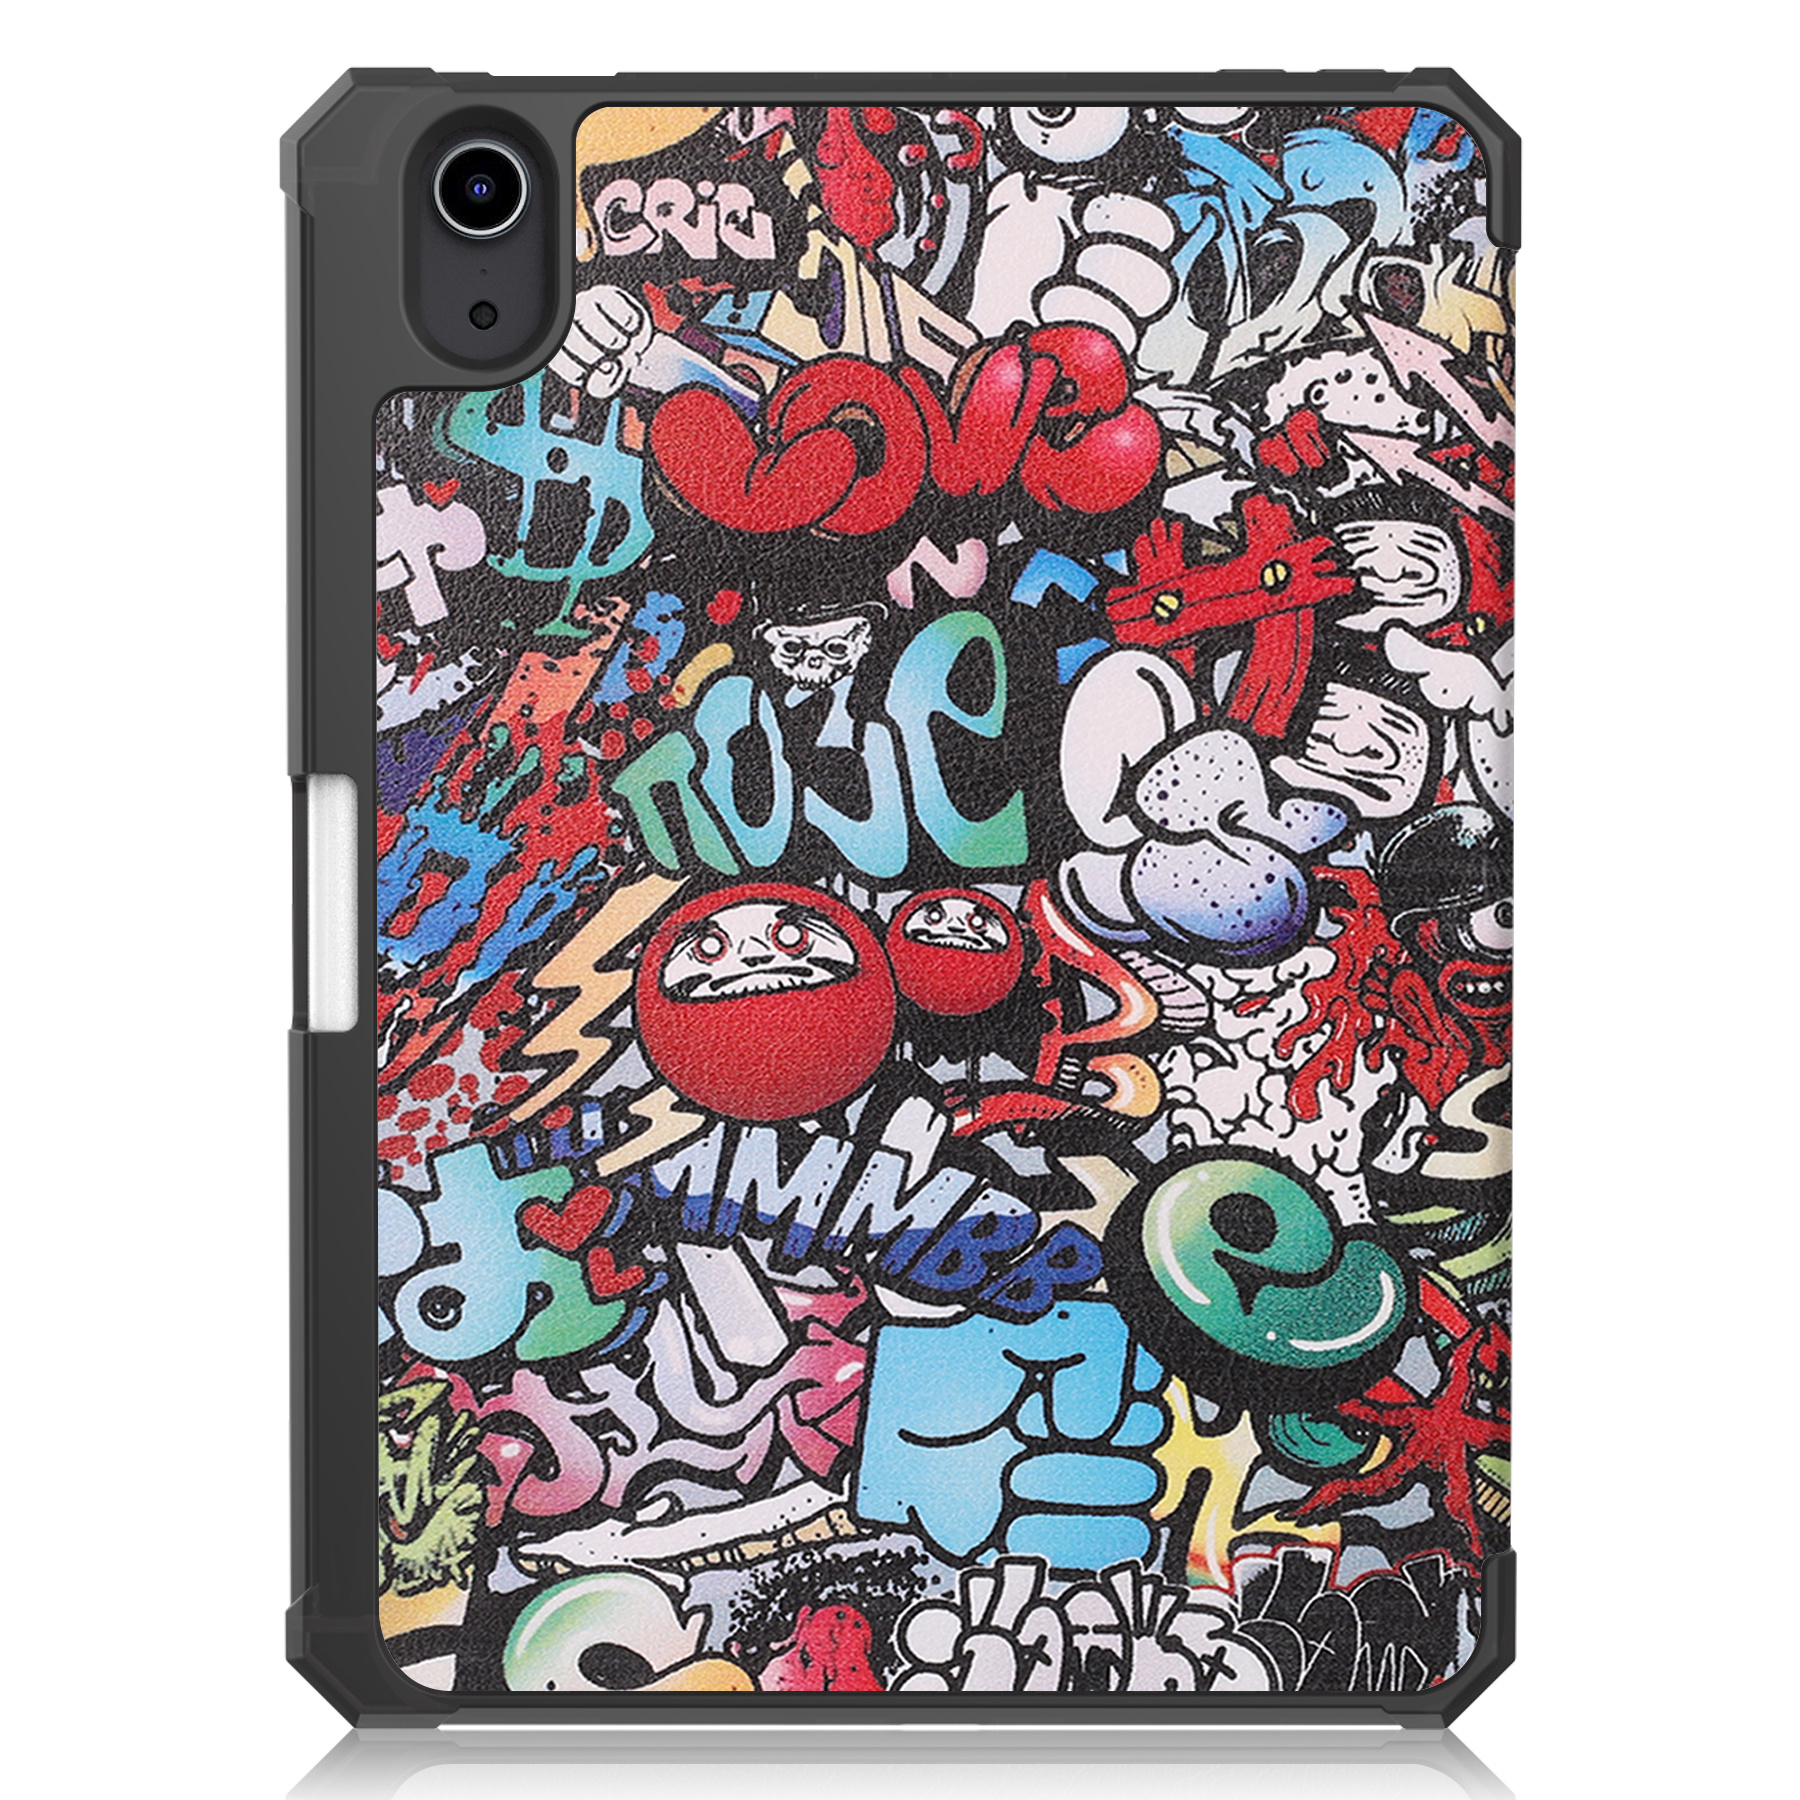 NoXx iPad Mini 6 Hoesje Case Hard Cover Hoes Met Apple Pencil Uitsparing Book Case - Graffity